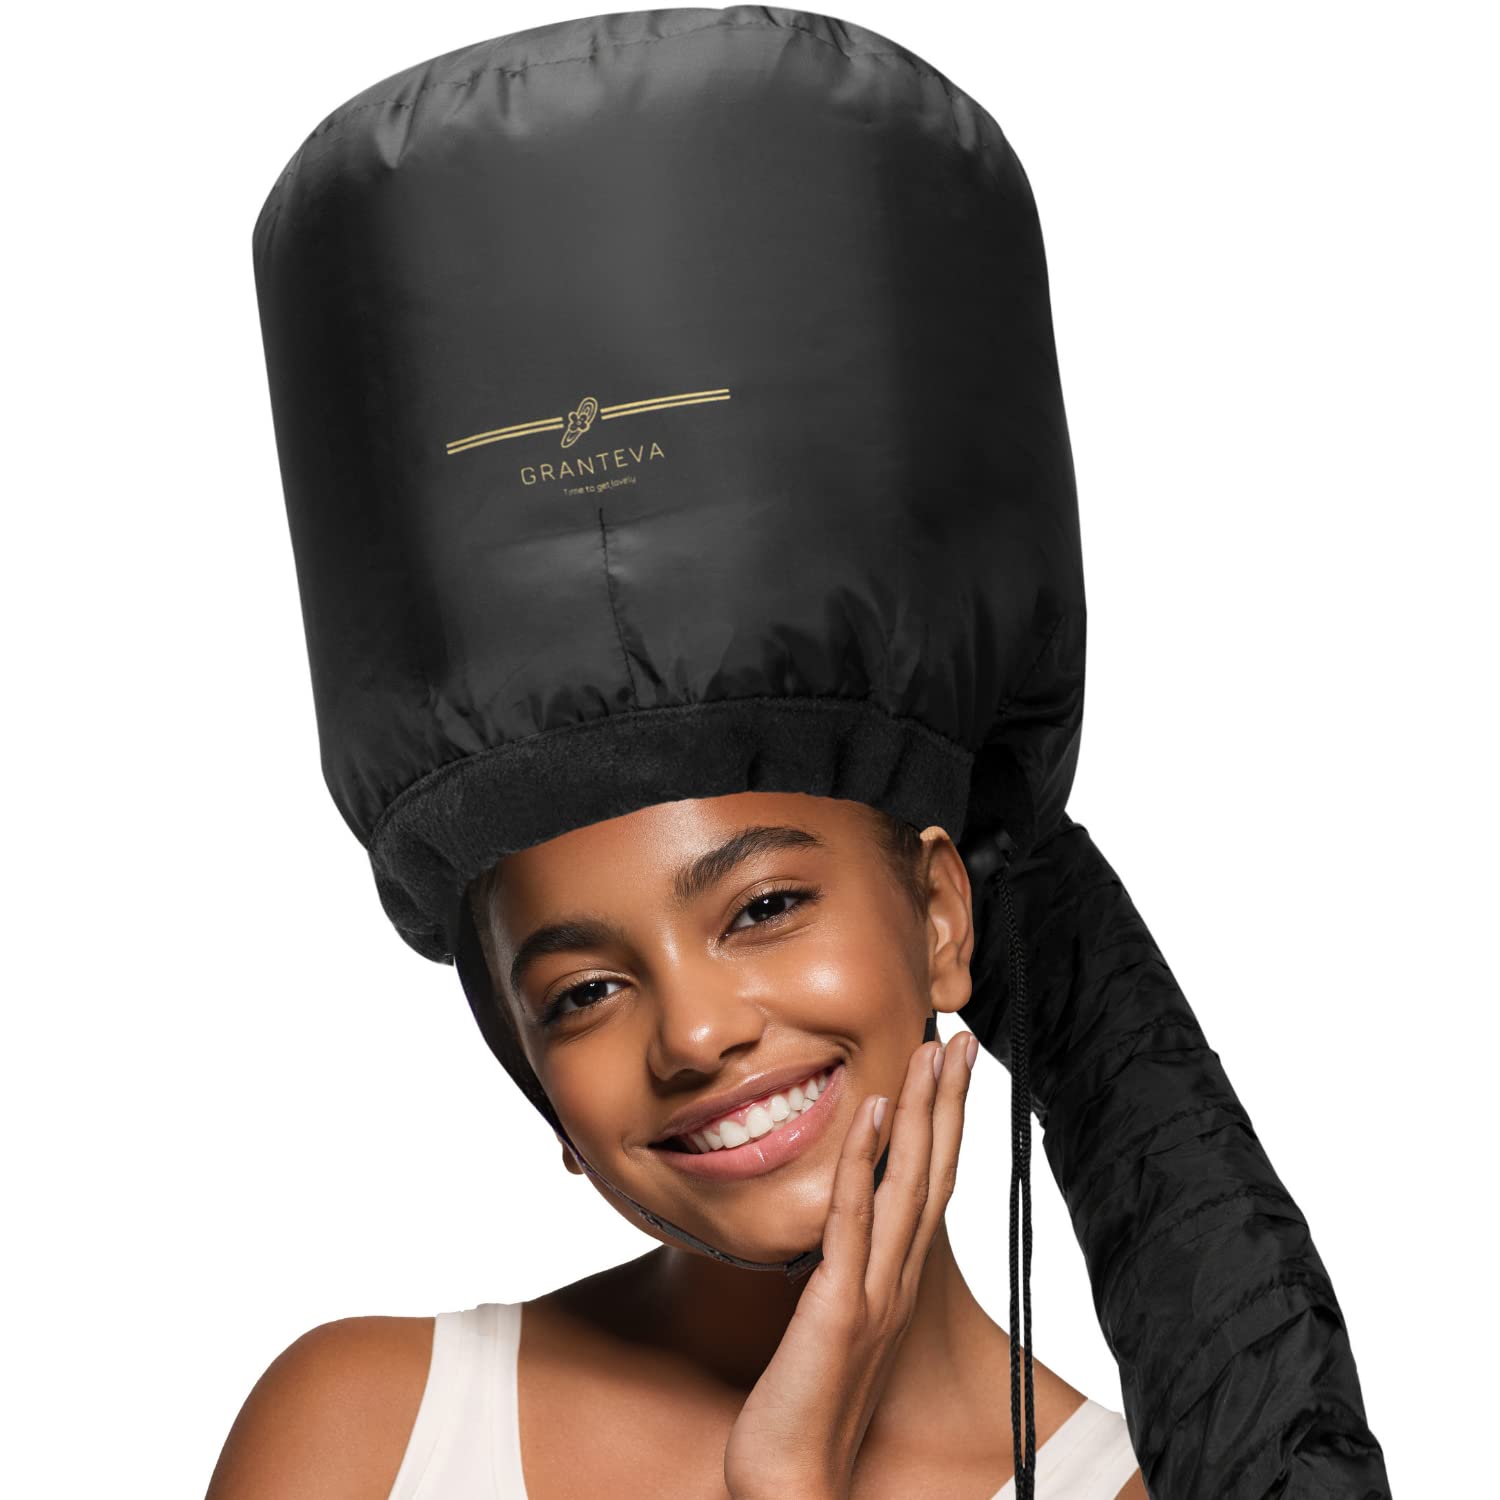 Hair Dryer Bonnet - Soft Hood Hair Dryer Cap For Home - Bonnet Hair Dryer  Kit w/A Headband Integrated, Speeds Up Drying Time at Home, Used for Deep  Conditioning, Style- Portable, Adjustable,